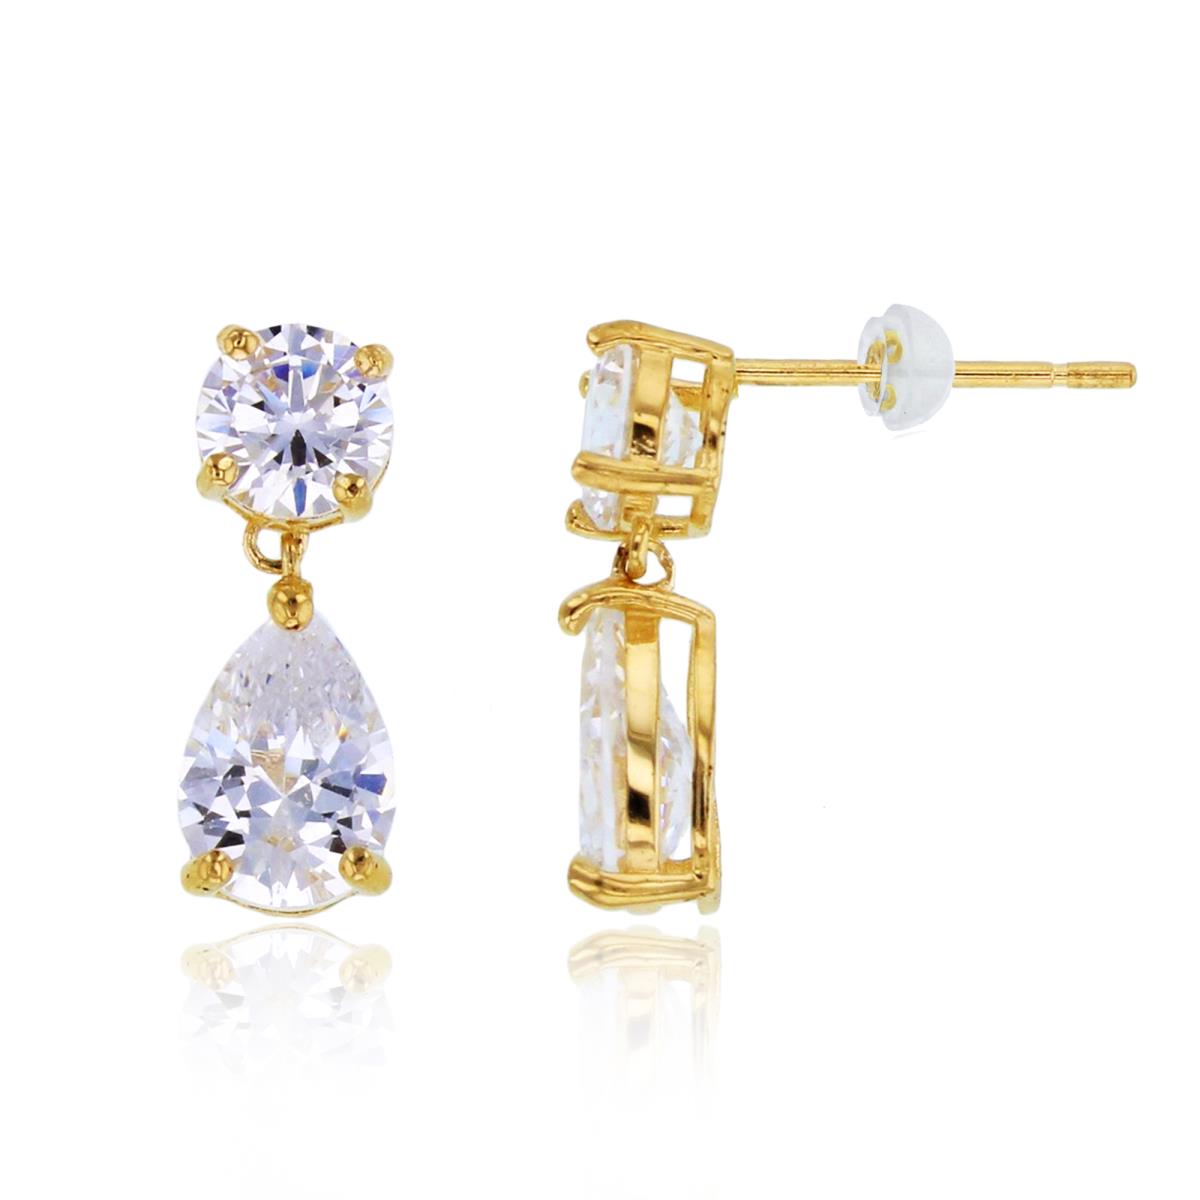 14K Yellow Gold 4.5mm Rnd & 7x5mm PS Drop CZ Dangling Earrings with Silicon Backs